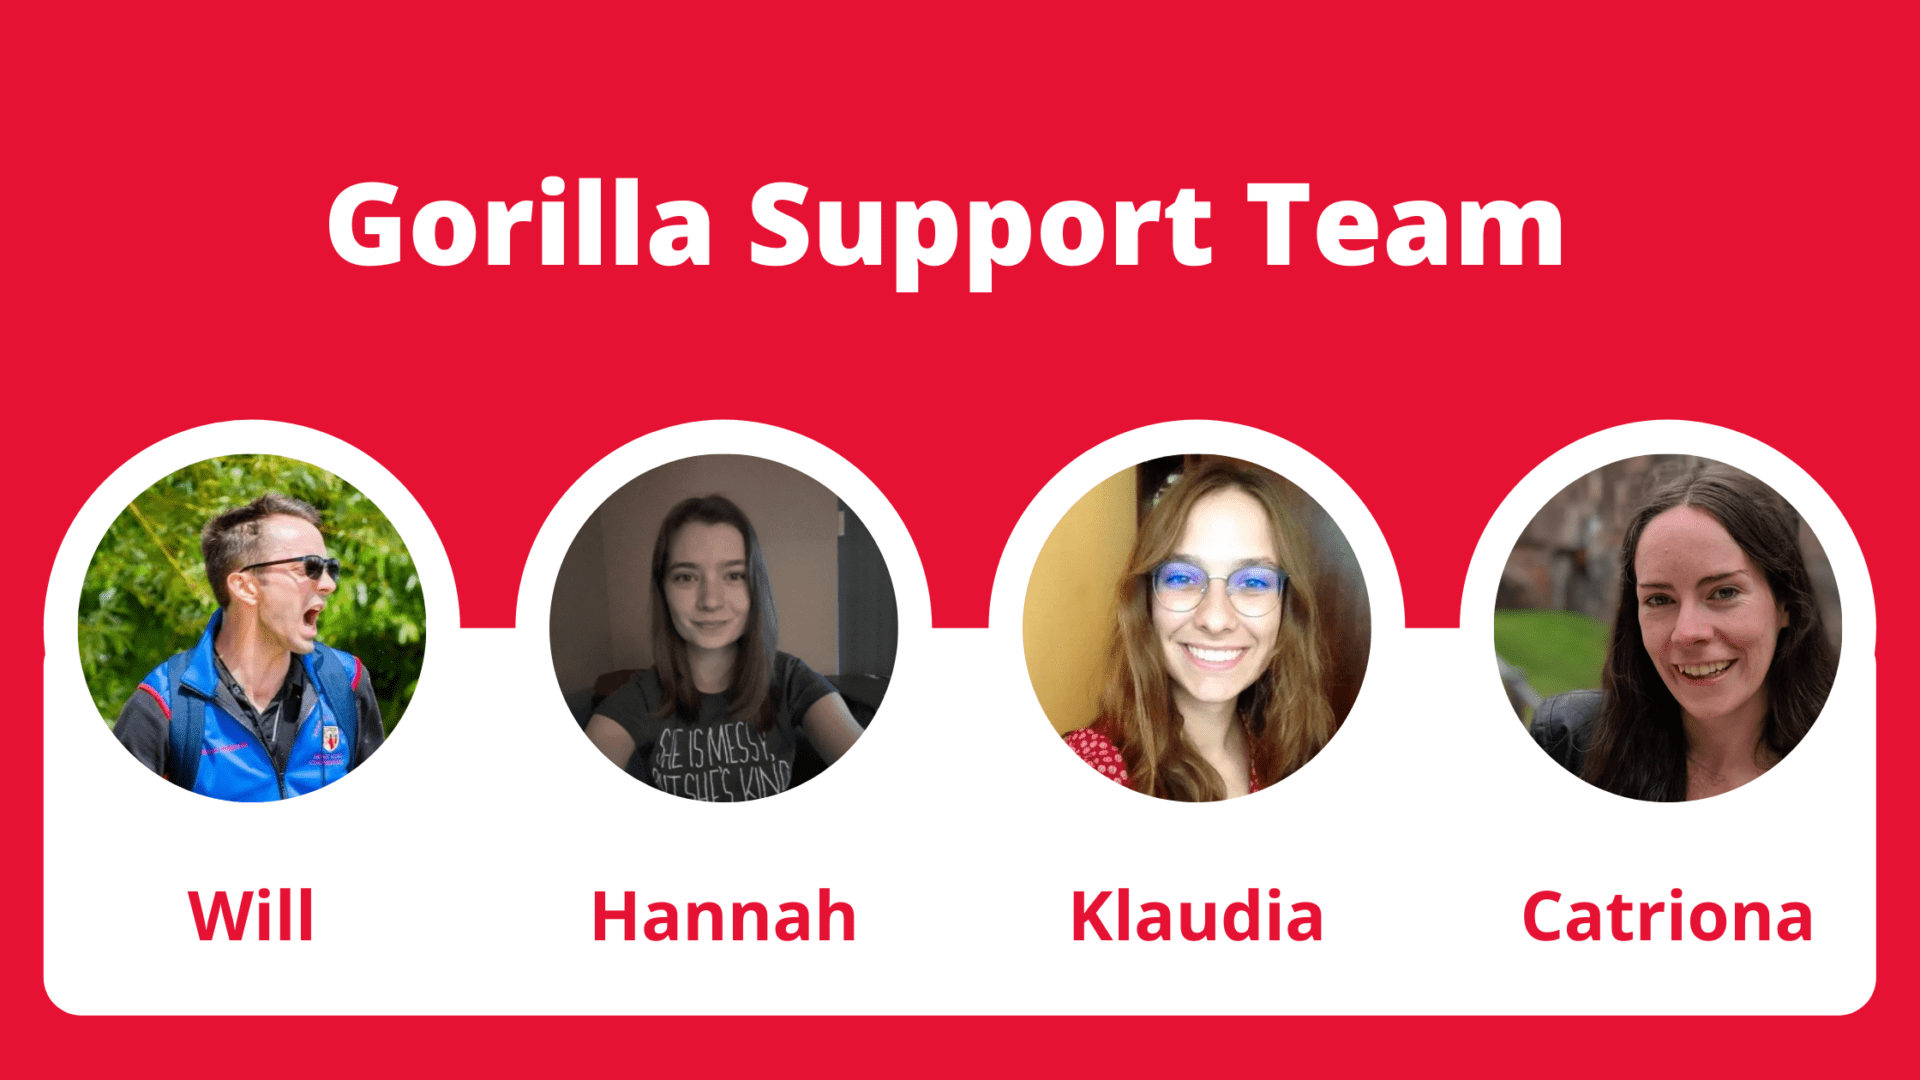 Image of the four members of the Gorilla support team: Will, Hannah, Klaudia, and Catriona